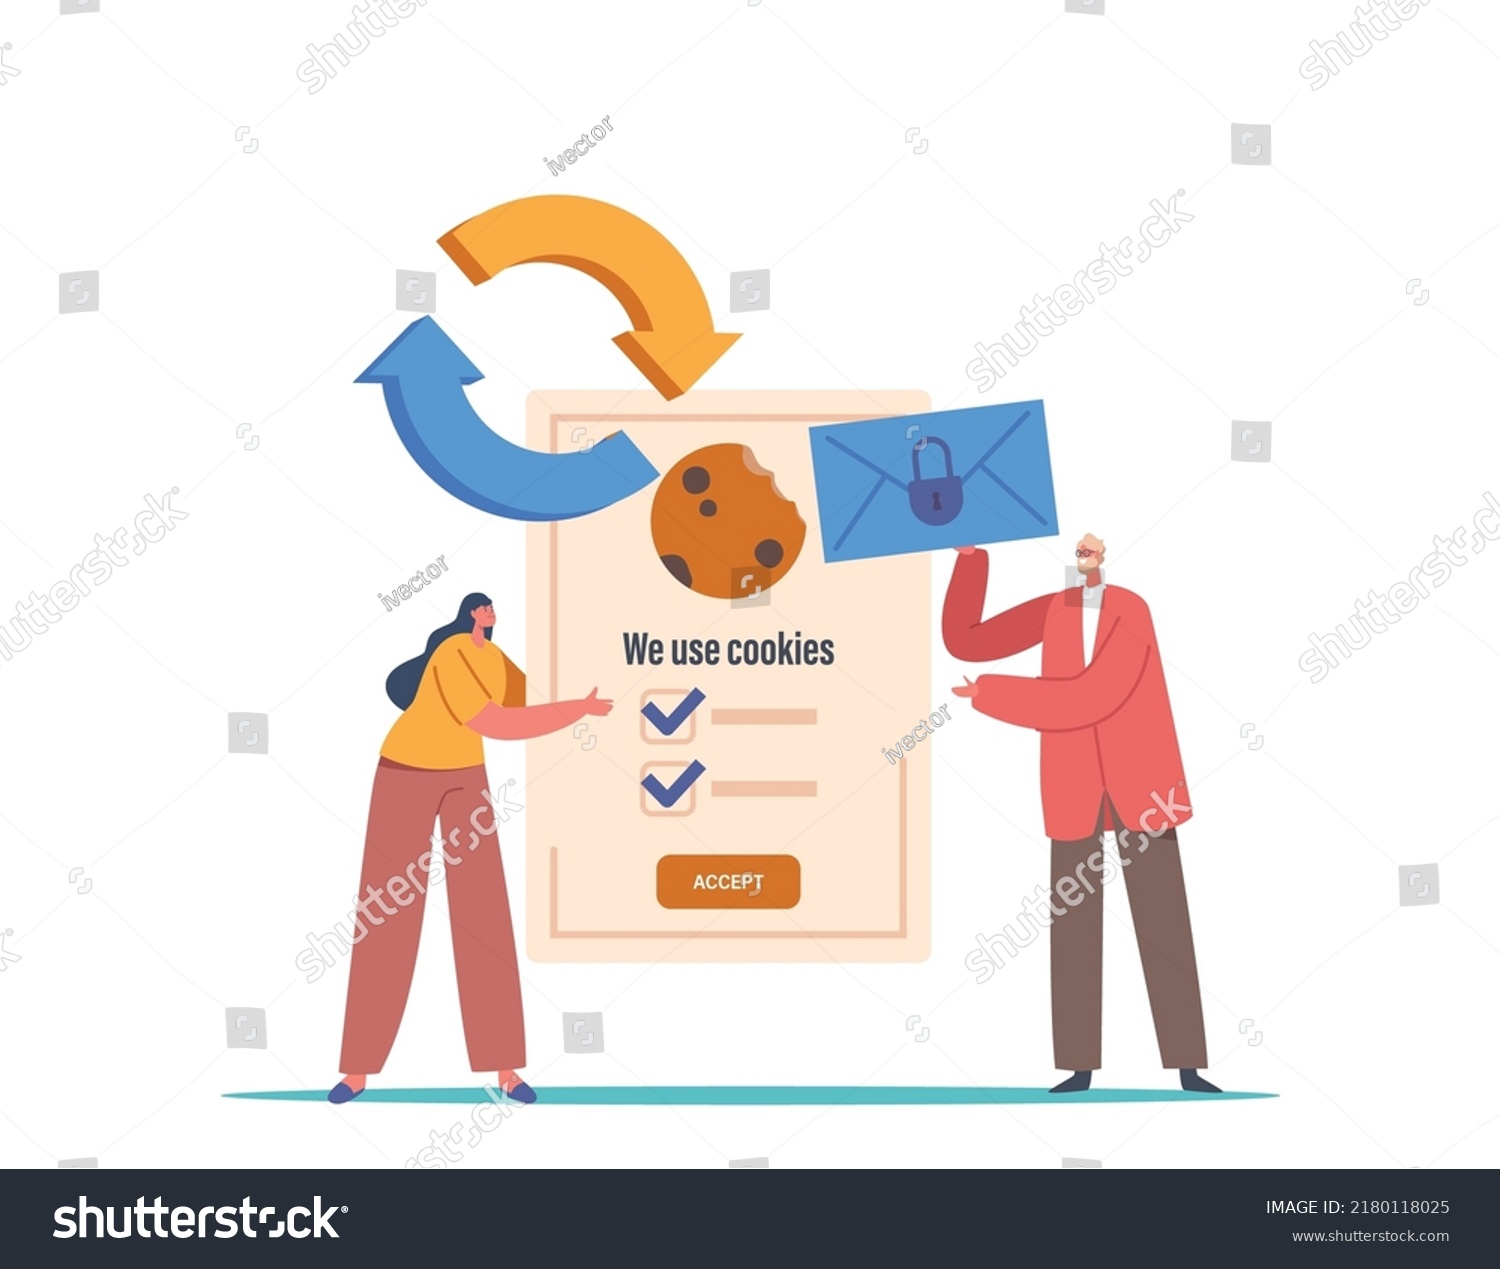 SVG of Protection Of Personal Information Cookie, GDPR Concept. Tiny Characters With Huge Internet Web Pop Up We Use Cookies Policy Notification, Confidential Information. Cartoon People Vector Illustration svg